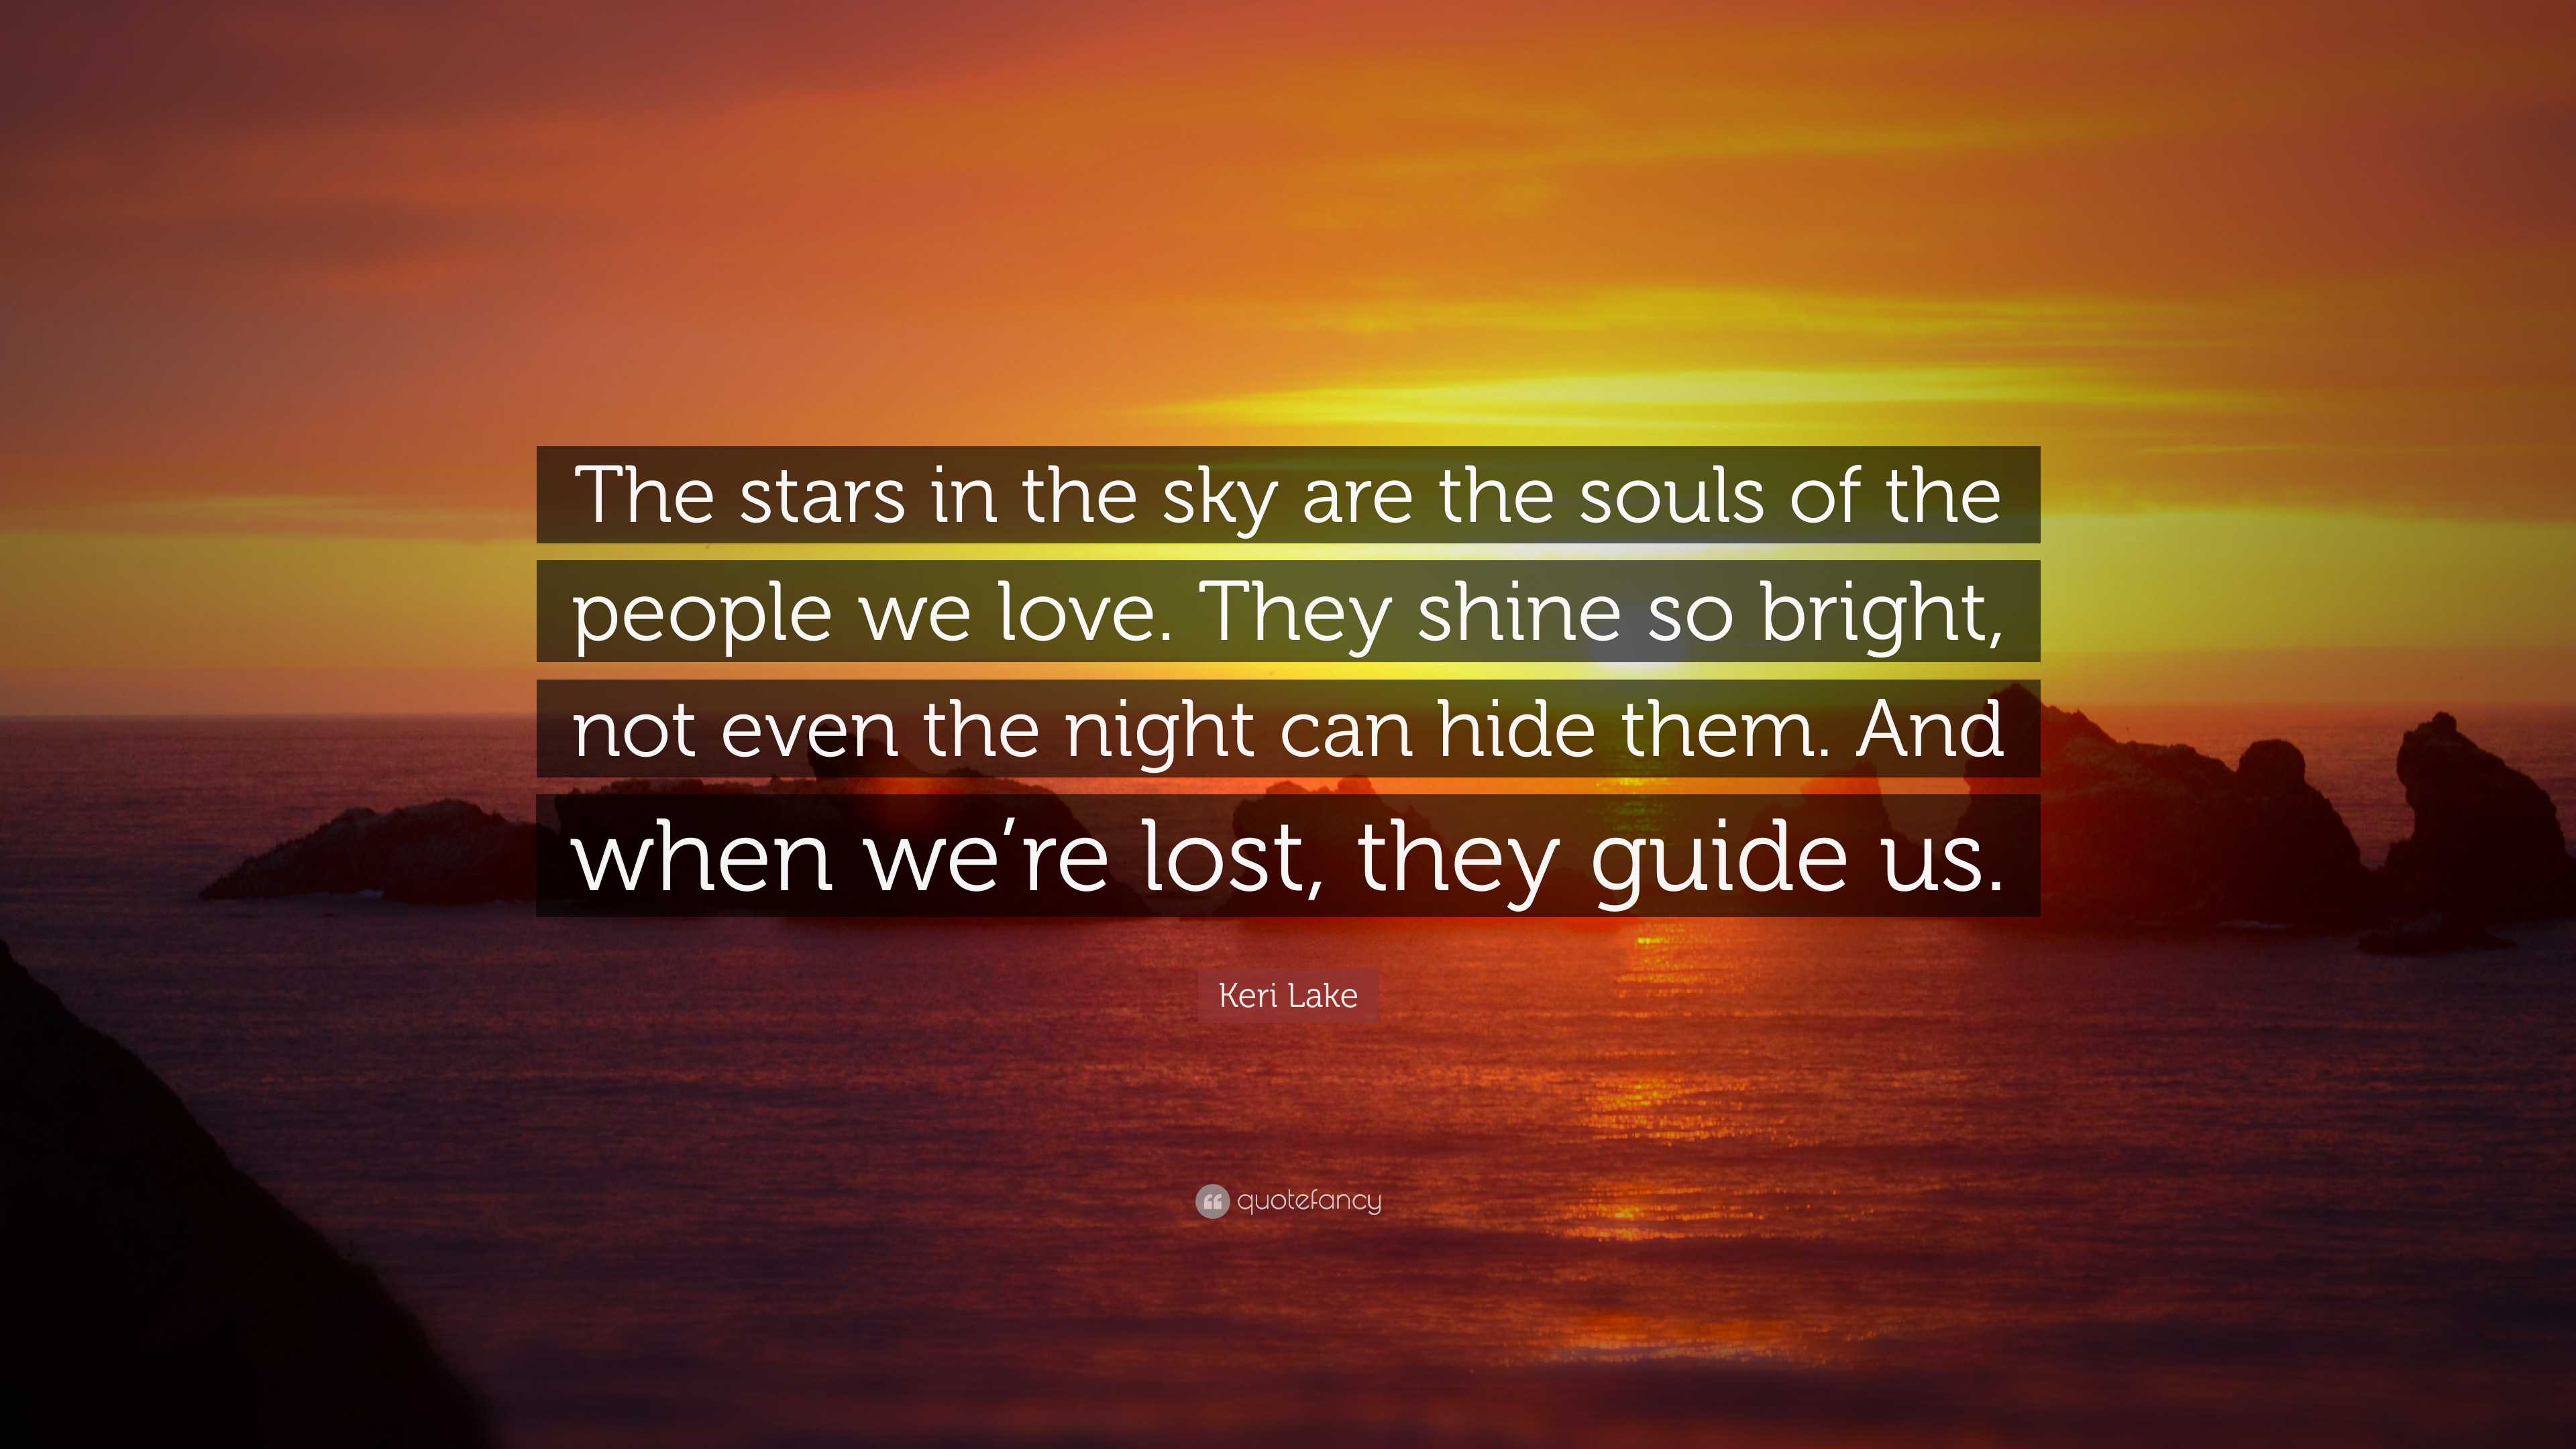 Keri Lake Quote: “The stars in the sky are the souls of the people we love.  They shine so bright, not even the night can hide them. And wh”